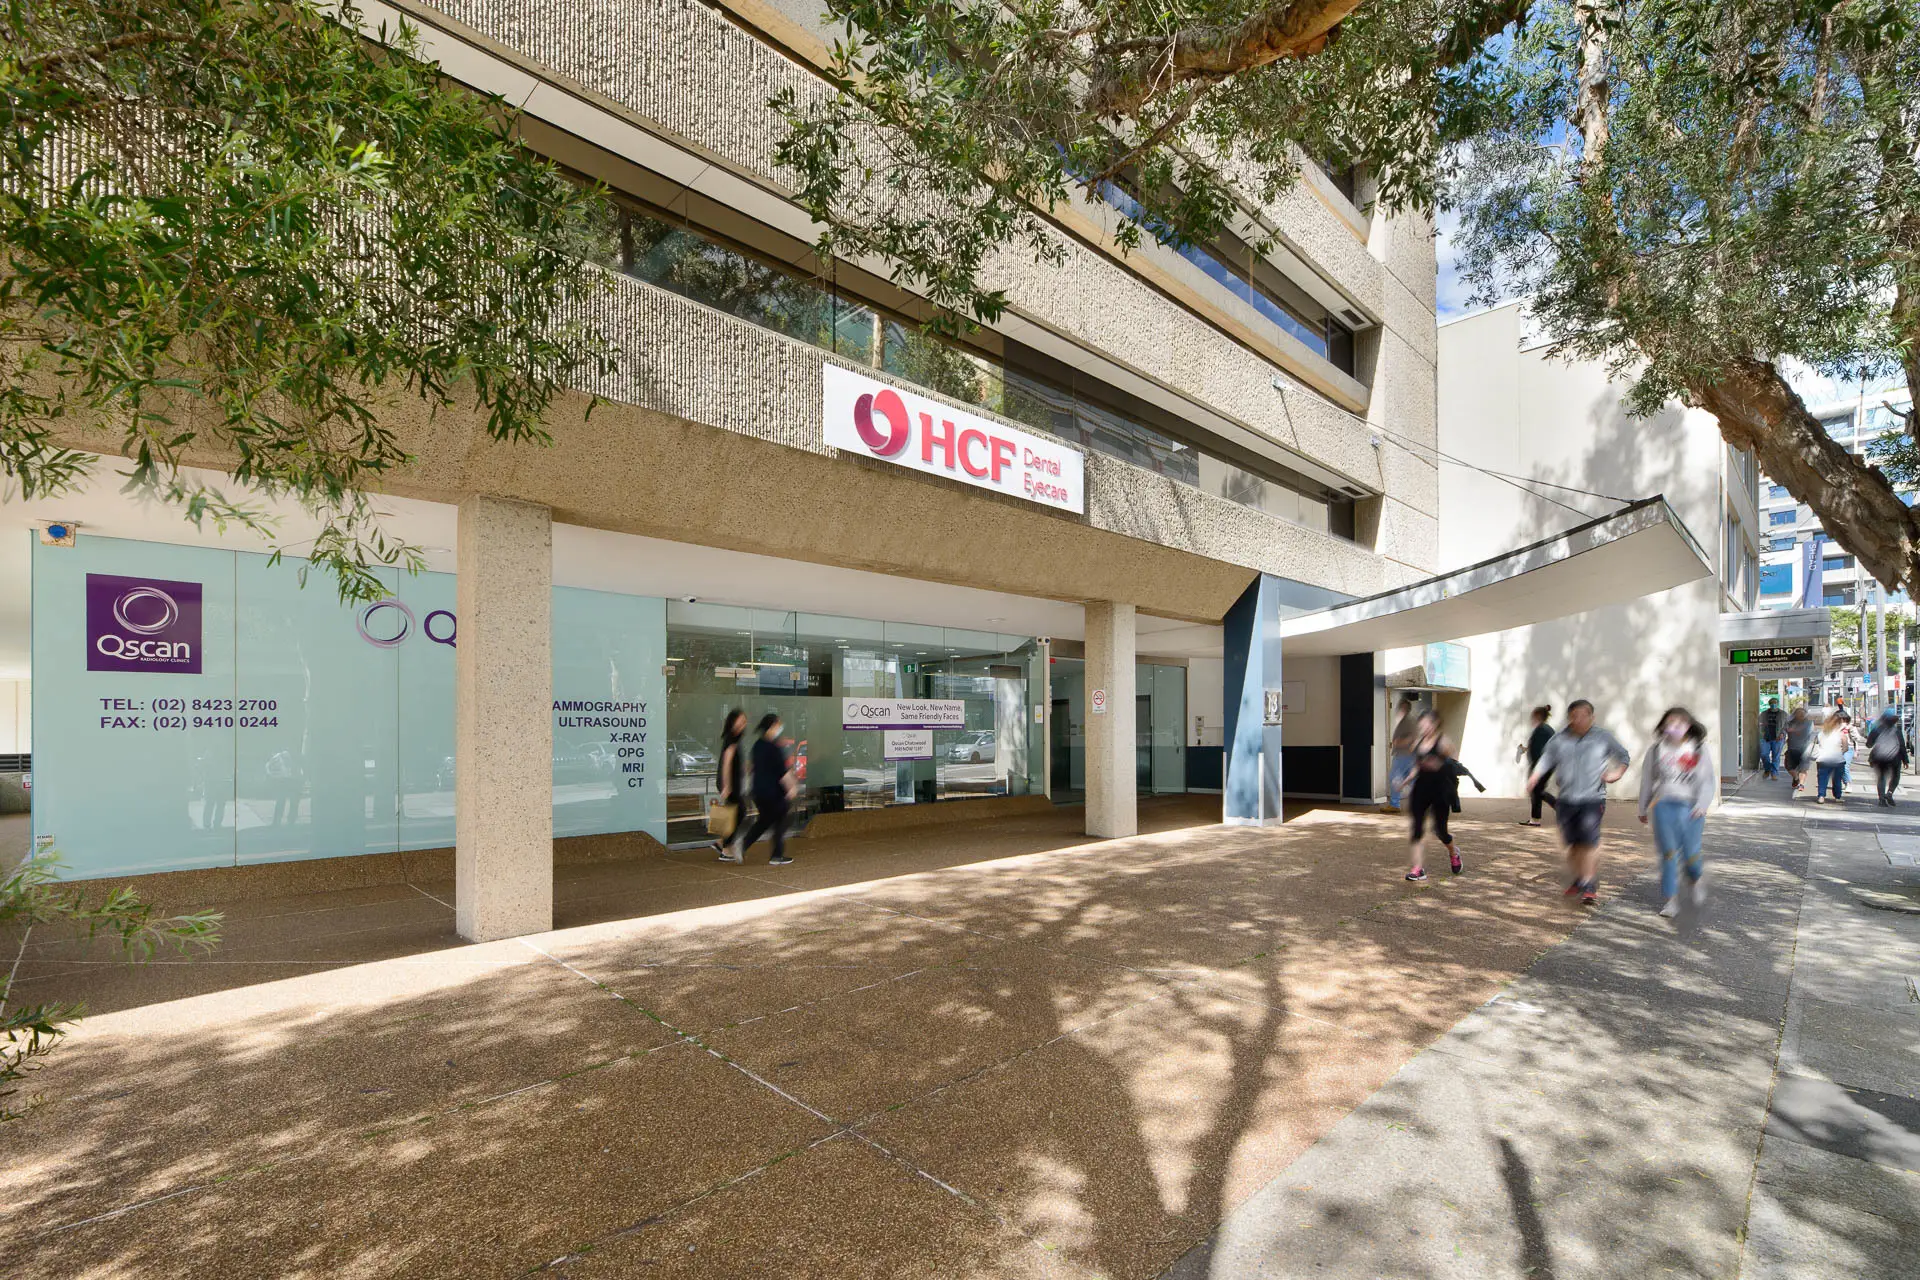 Suite 101/13 Spring Street, Chatswood For Lease by Shead Property - image 1